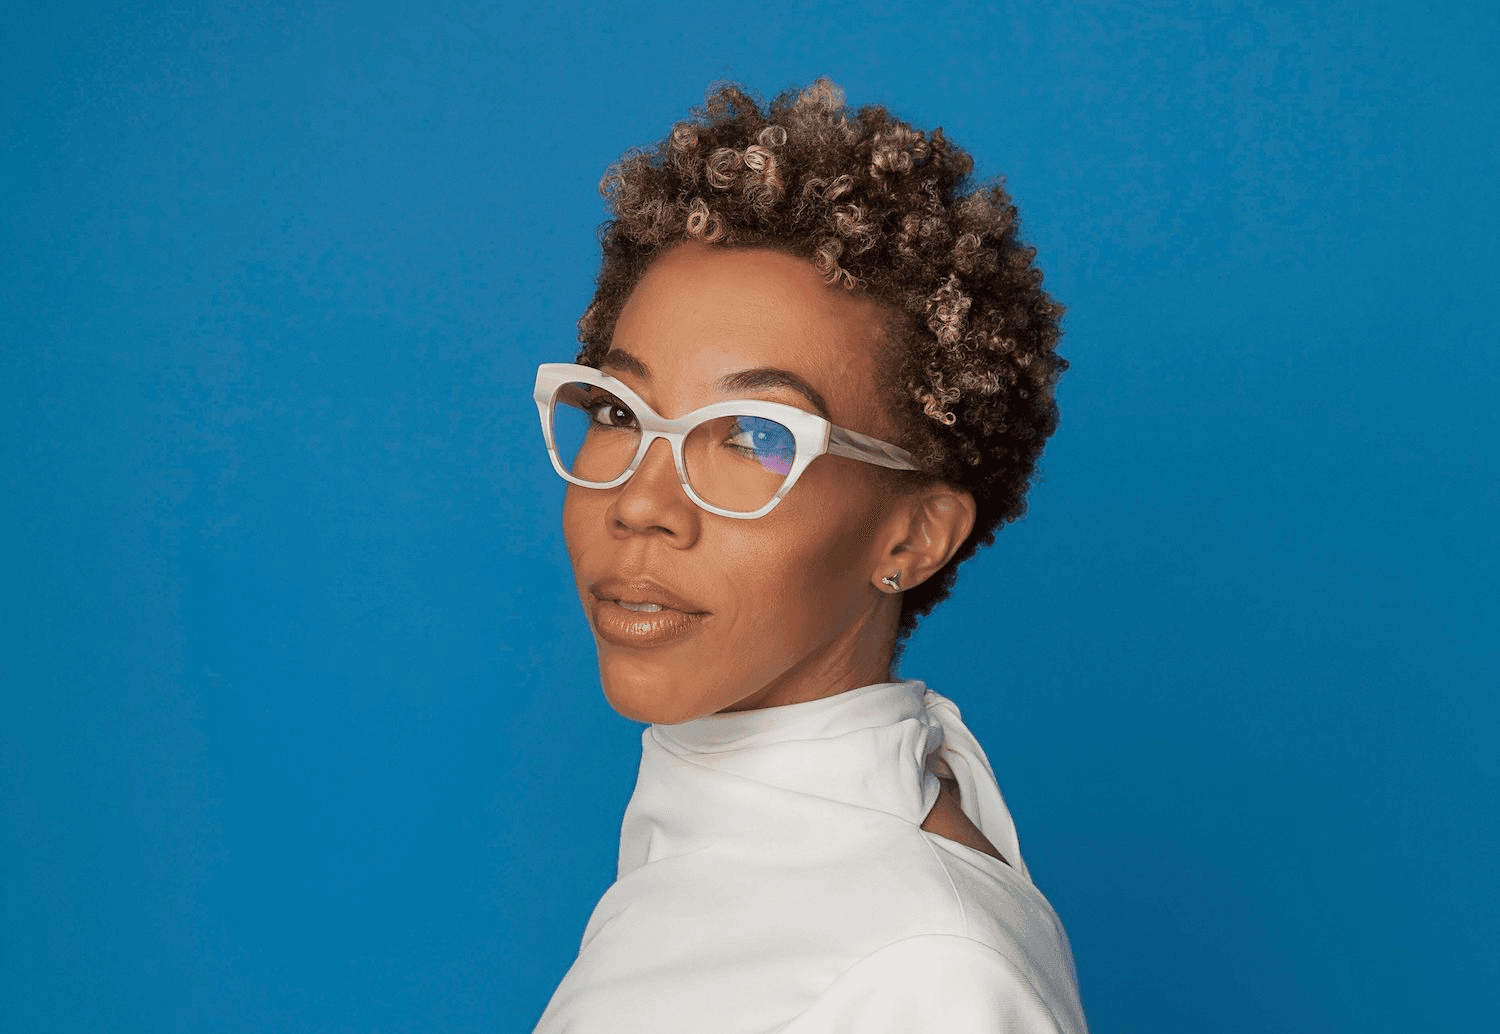 Inspiring Art and the Black Experience: Amy Sherald